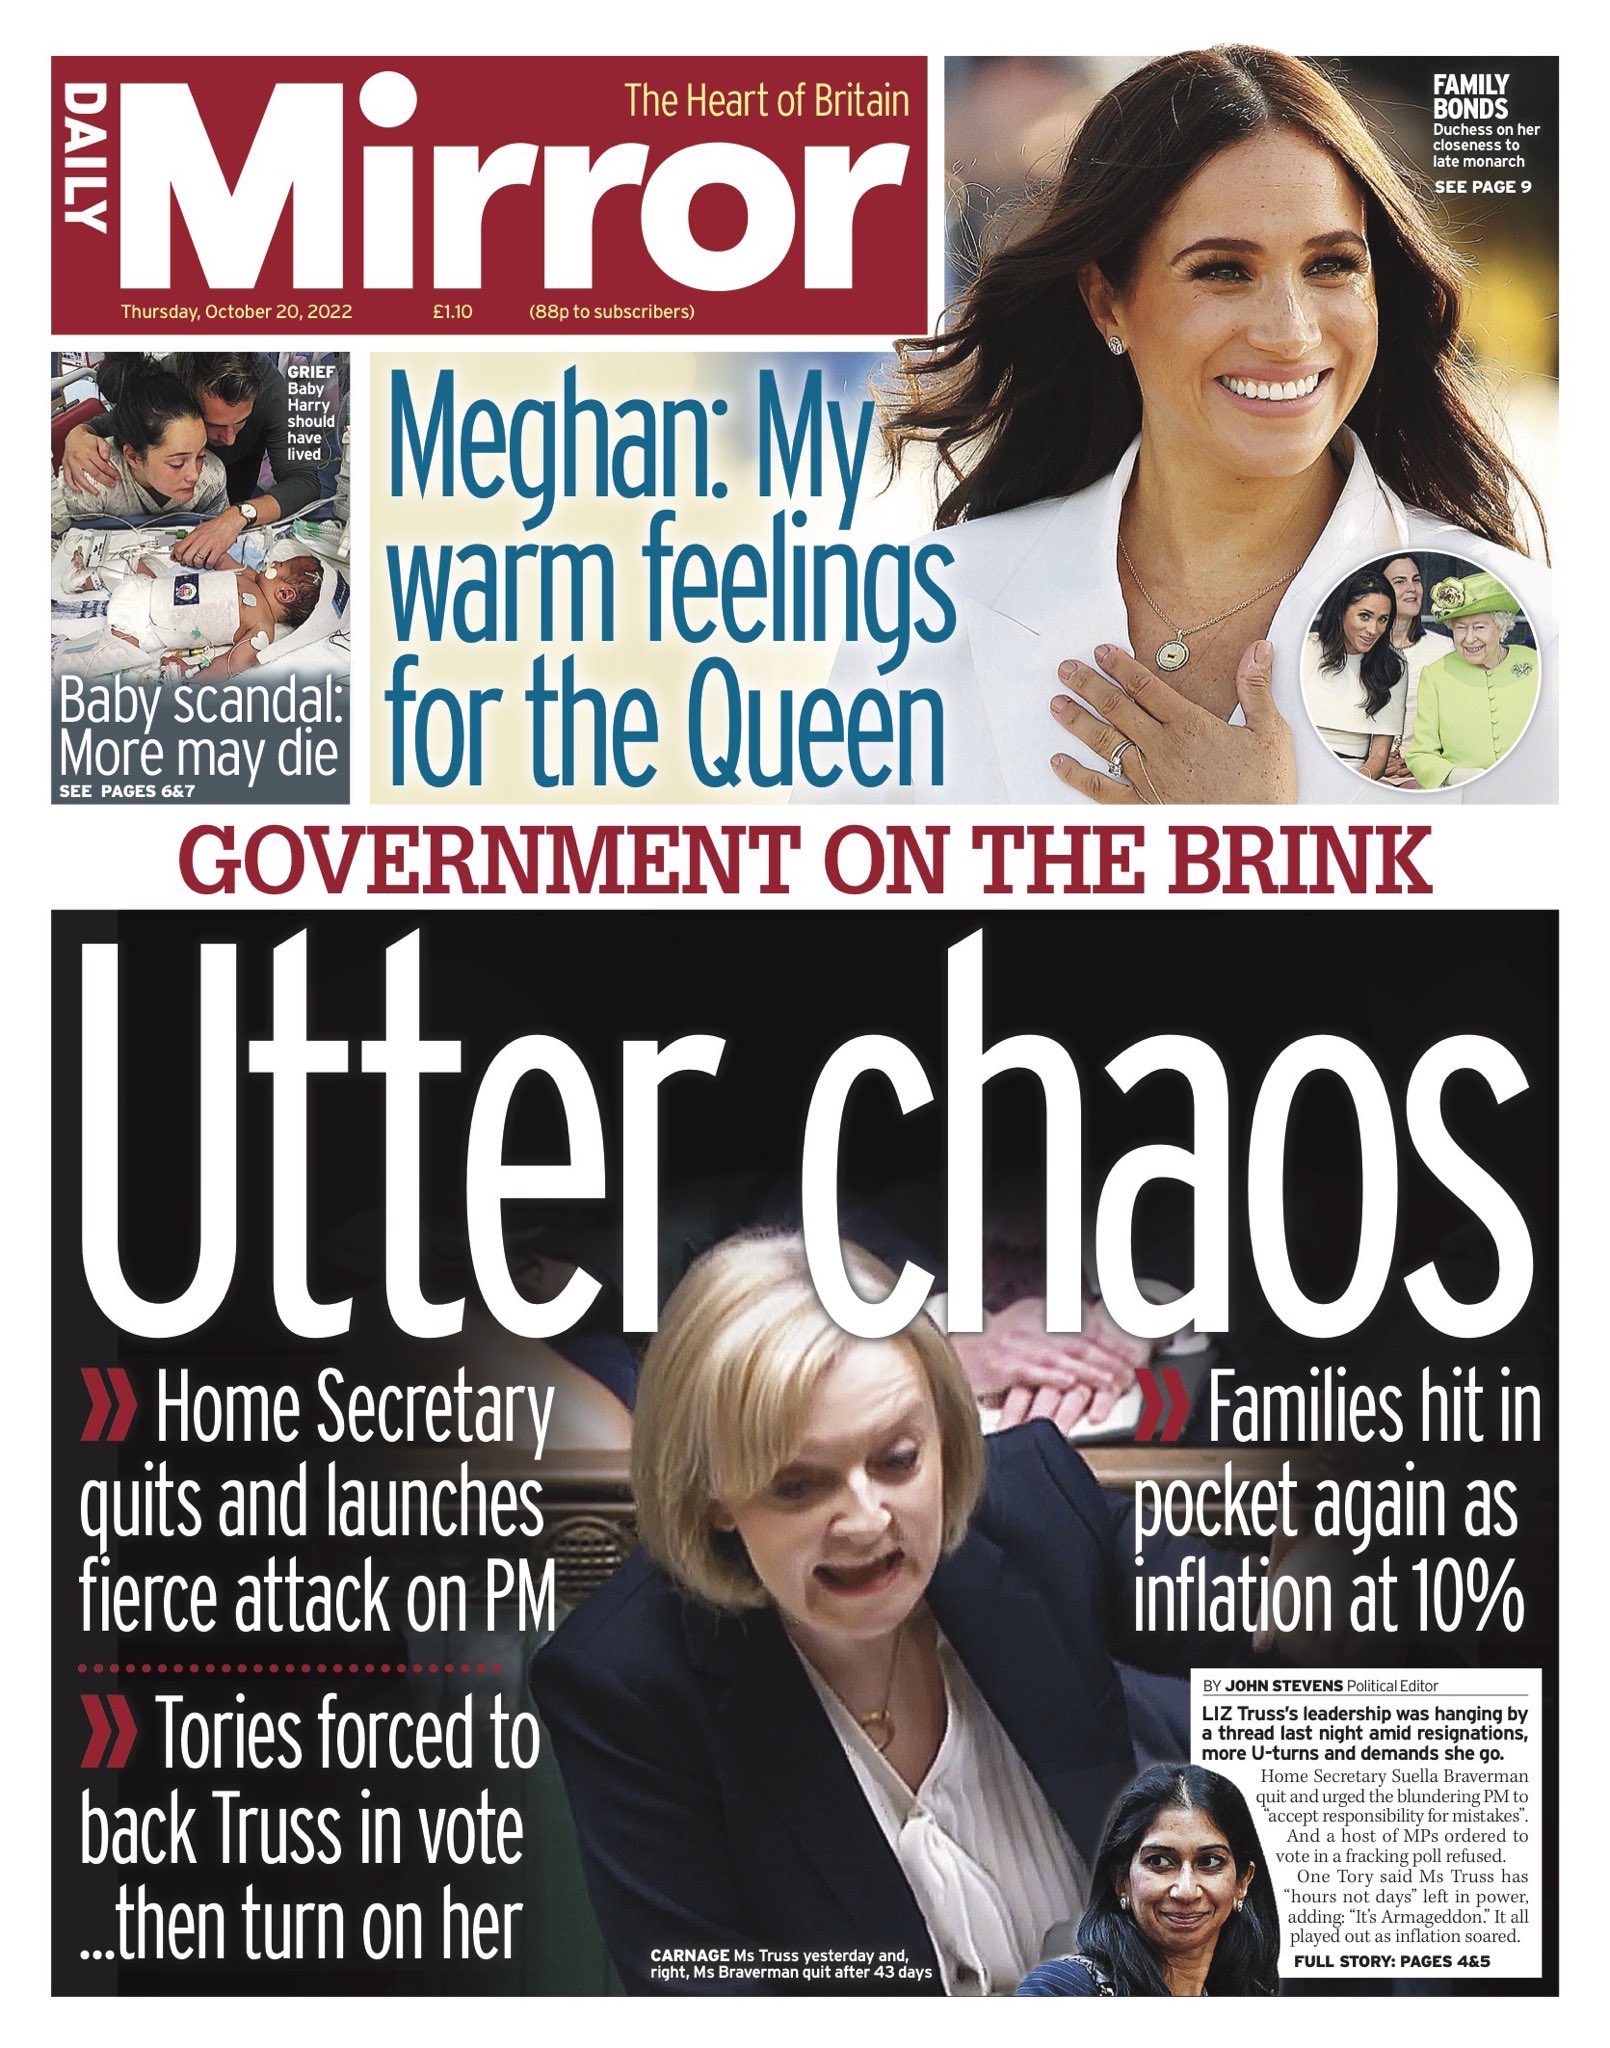 Allie Hodgkins-Brown on X: Thursday's Daily MIRROR: “Utter chaos”  #TomorrowsPapersToday  / X